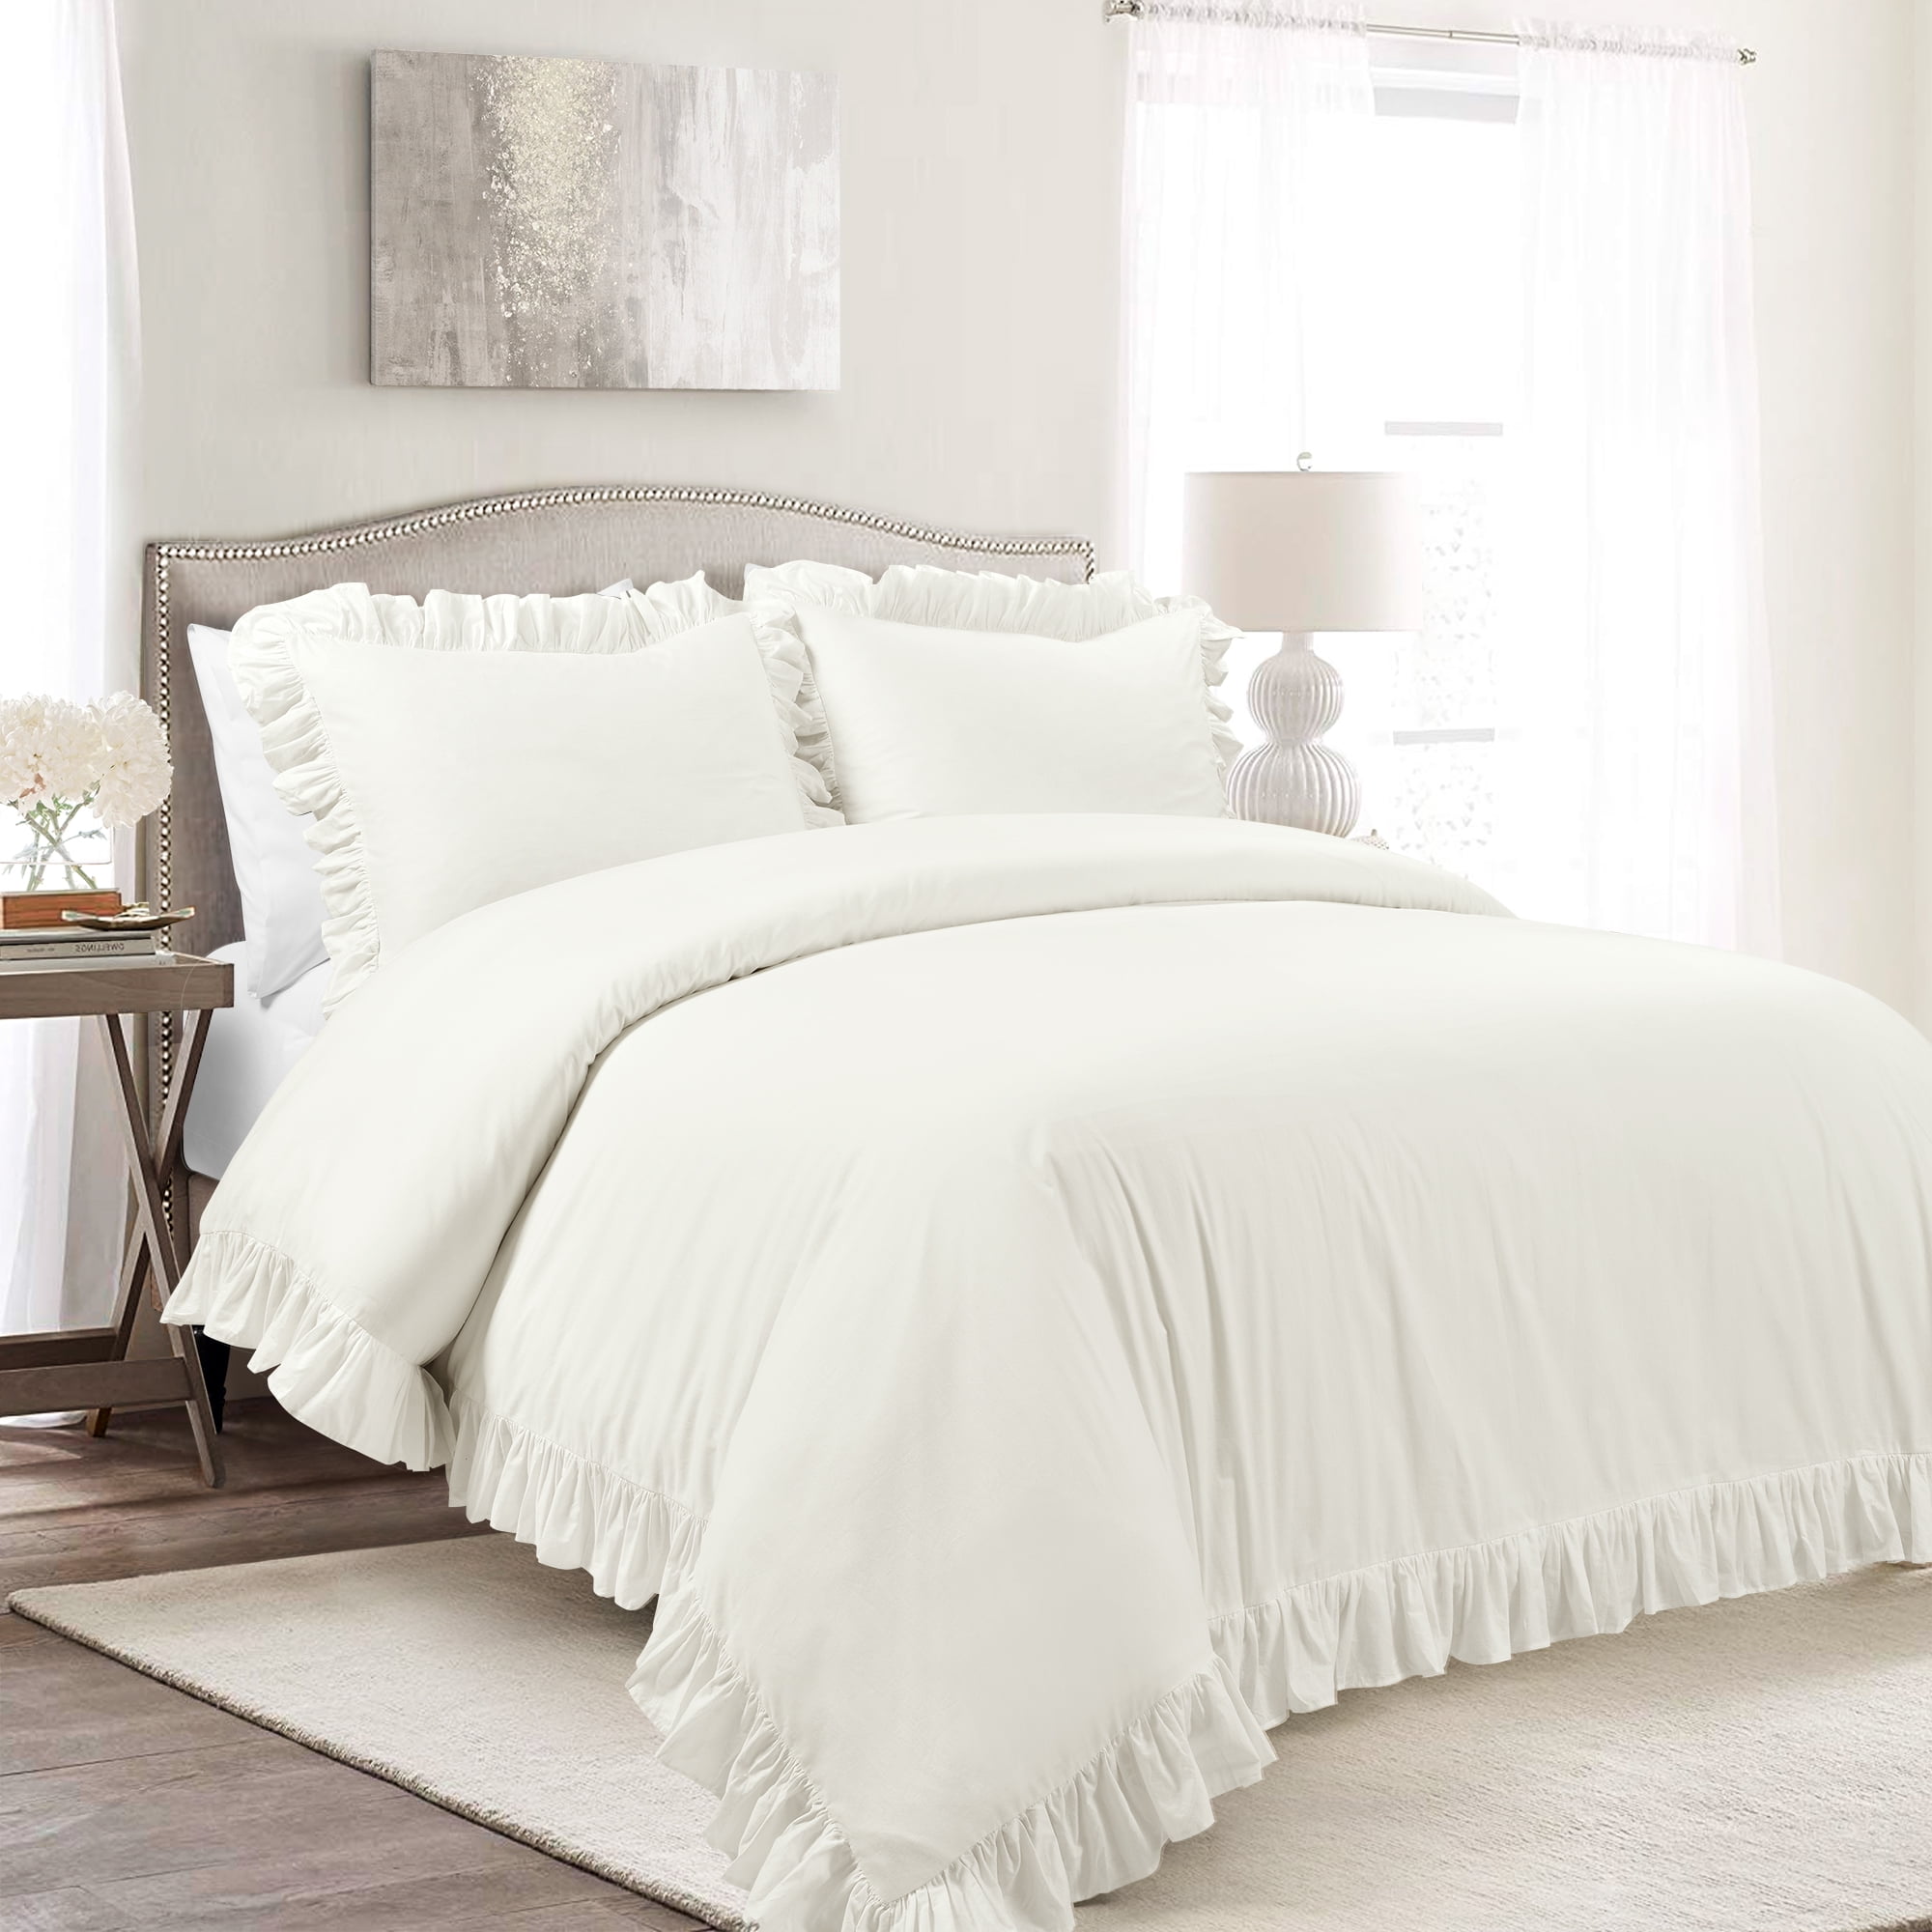 Details about   HIG 3 Piece Lace Ruffled Shabby Chic French Pastoral Style Comforter Set-Ivory 